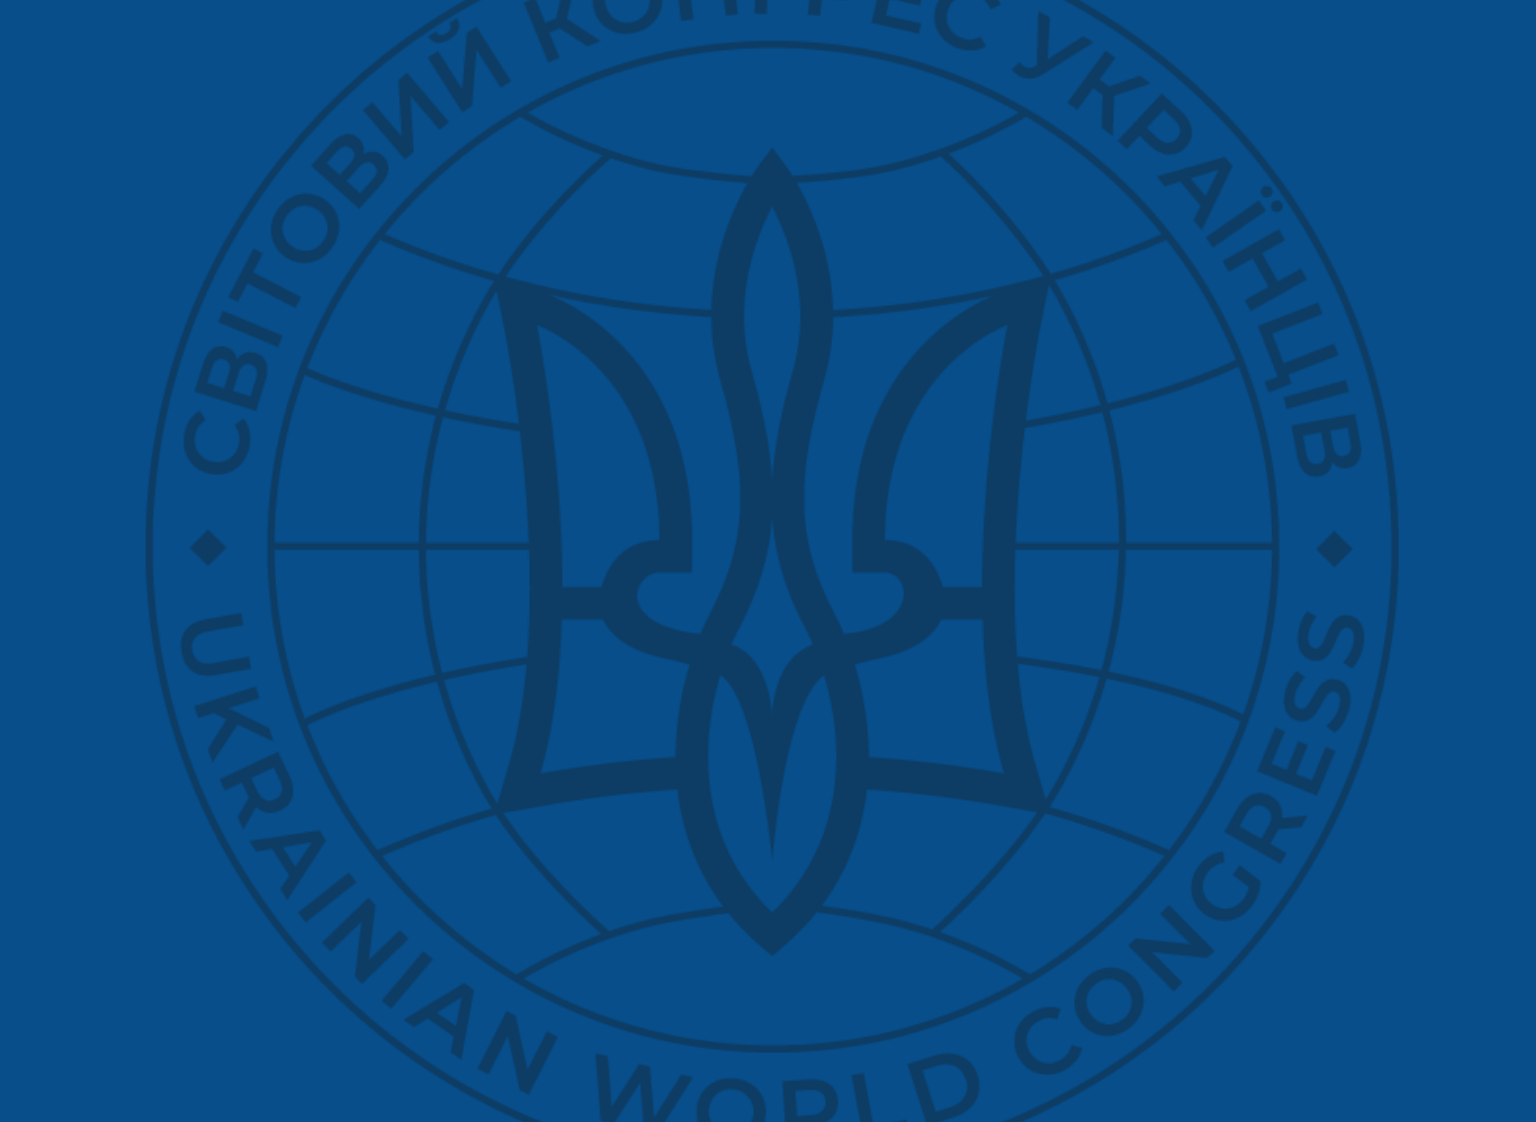 UWC resolutely condemns Russia’s recognition of the so-called Luhansk and Donetsk “people’s republics”